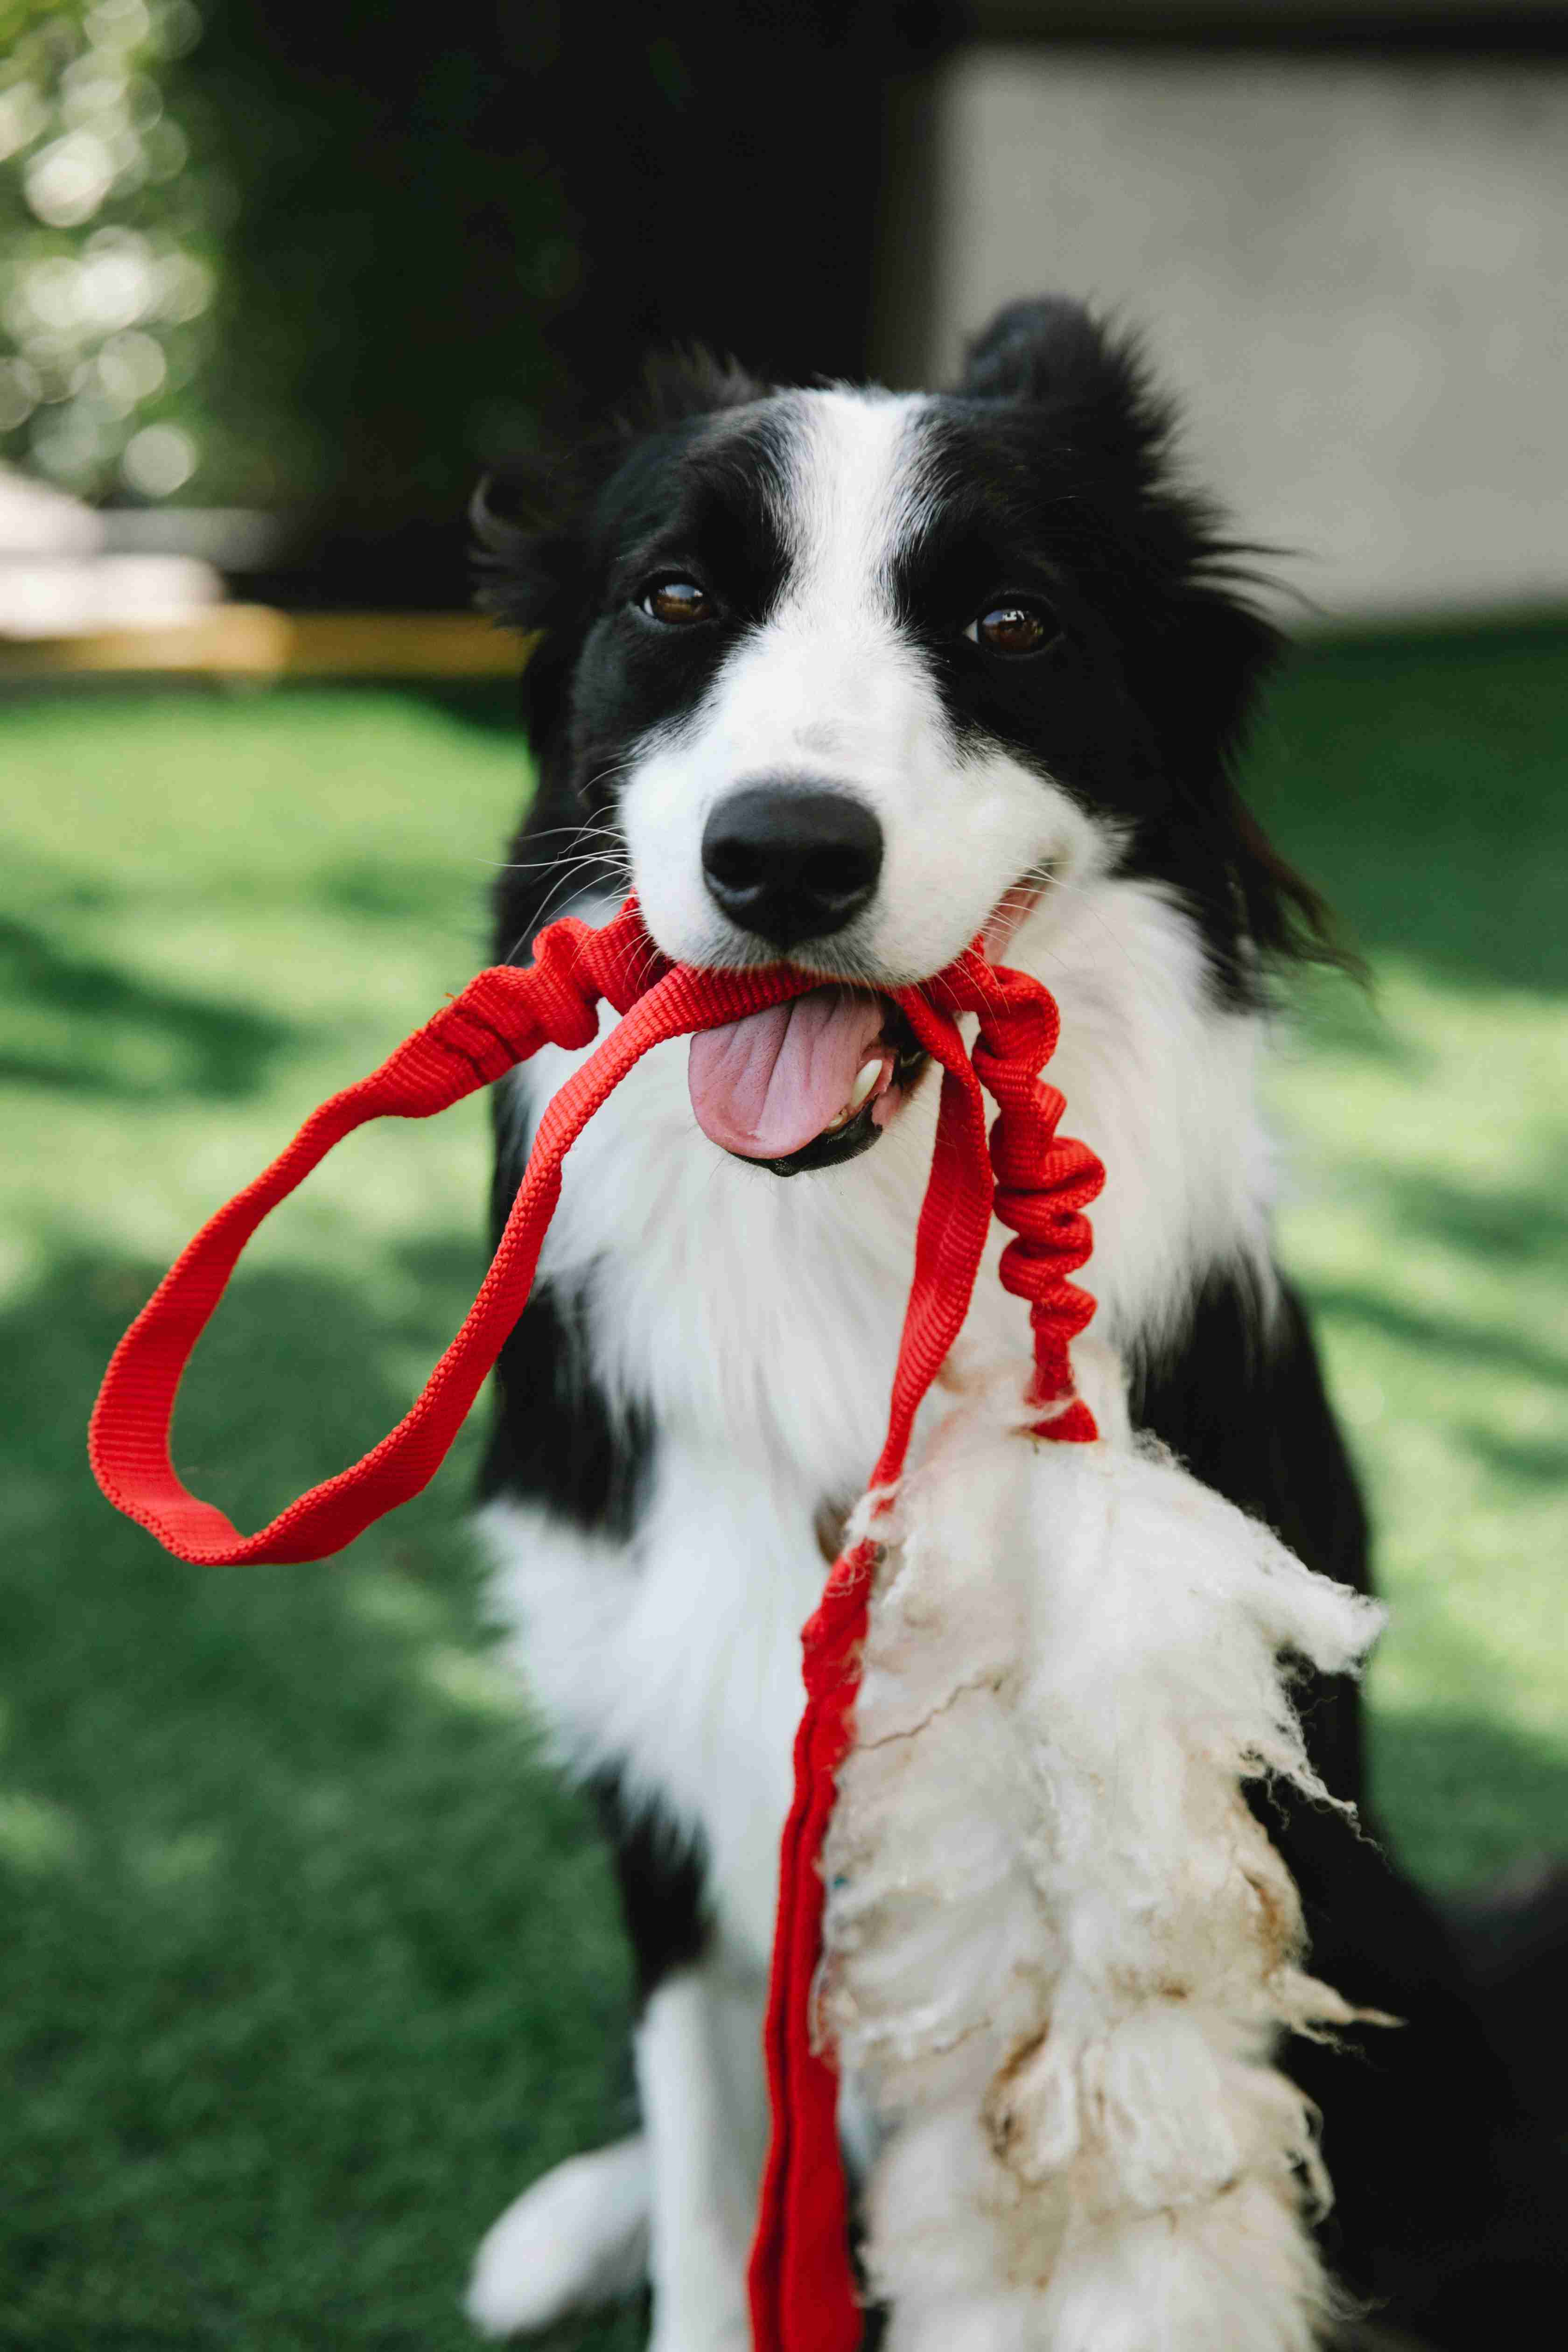 Border Collie Puppy Games: 10 Fun and Engaging Activities to Play Together